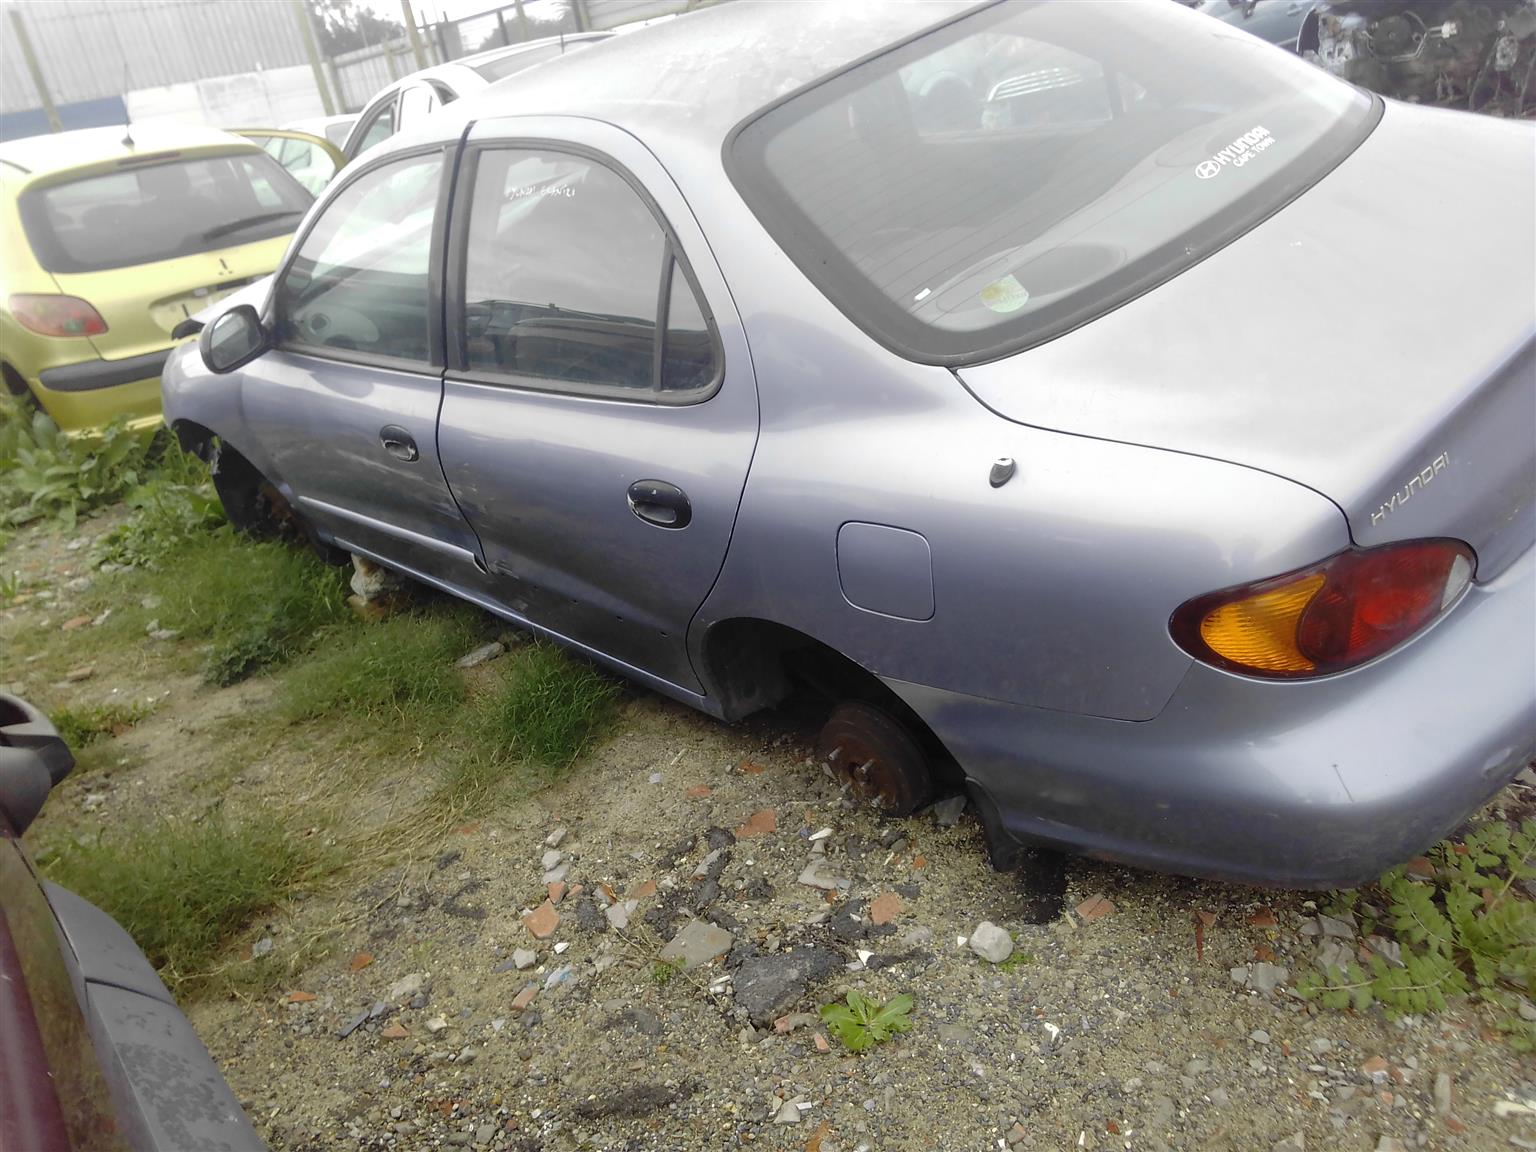 Hyundai Elantra J3 1999 stripping for used spares used parts for sale 